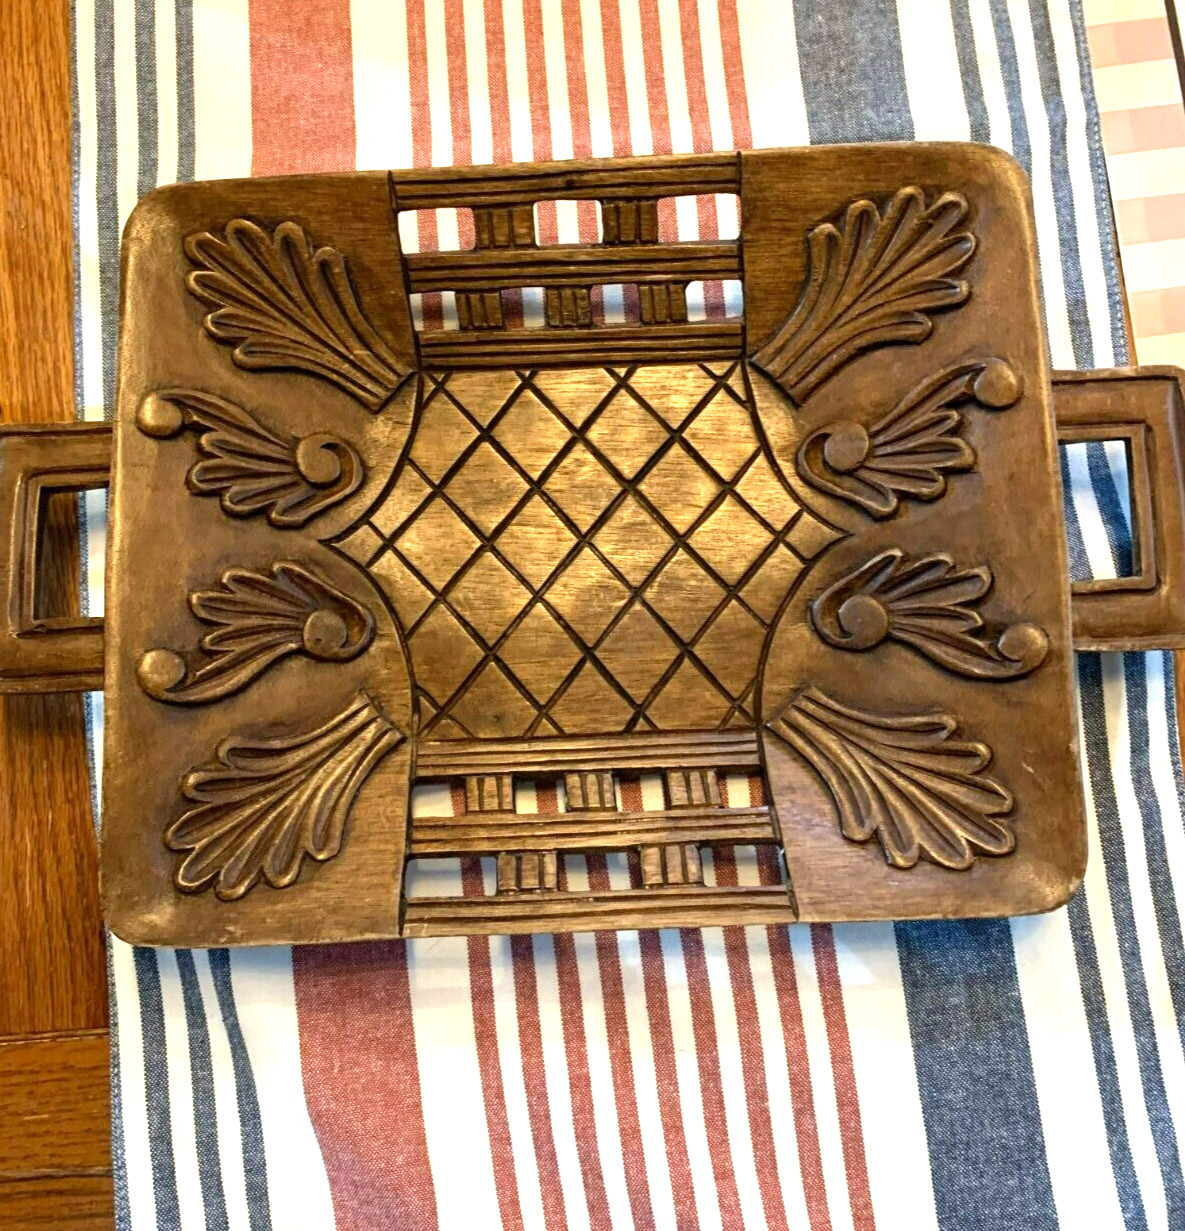 Wooden carved tray 15 X 9.5 inches, very unique. Versatile and a good size.